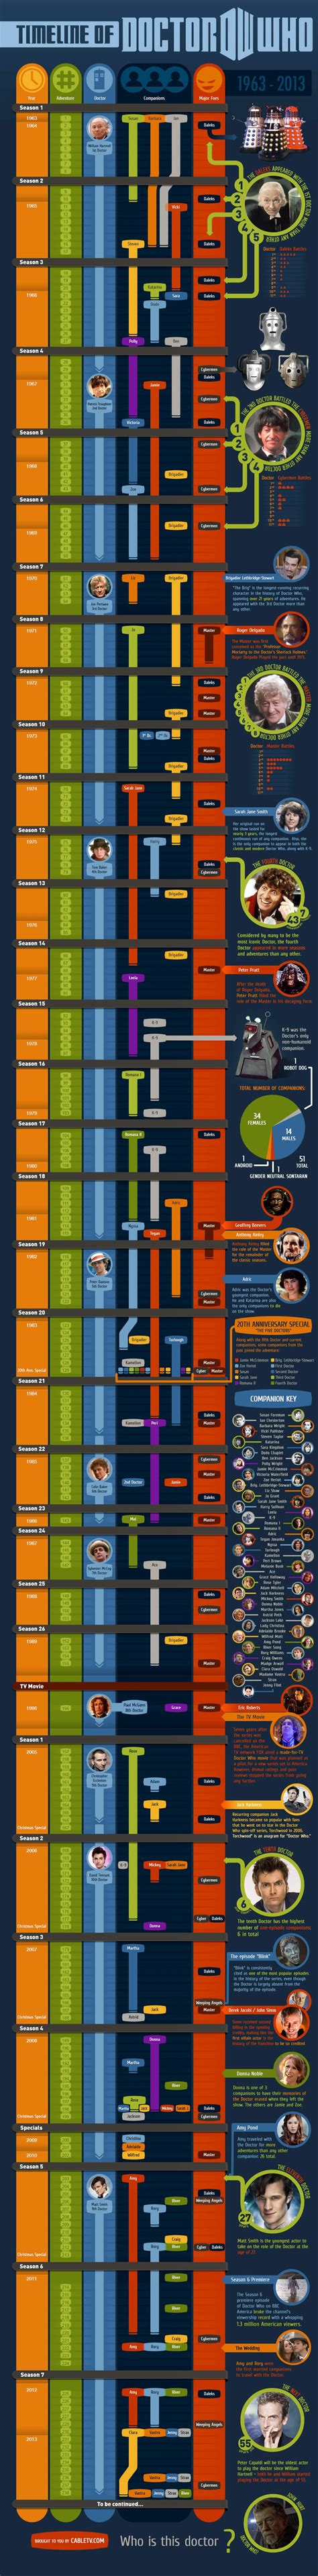 Doctor Who Timeline Infographic With Images Doctor Who Timeline